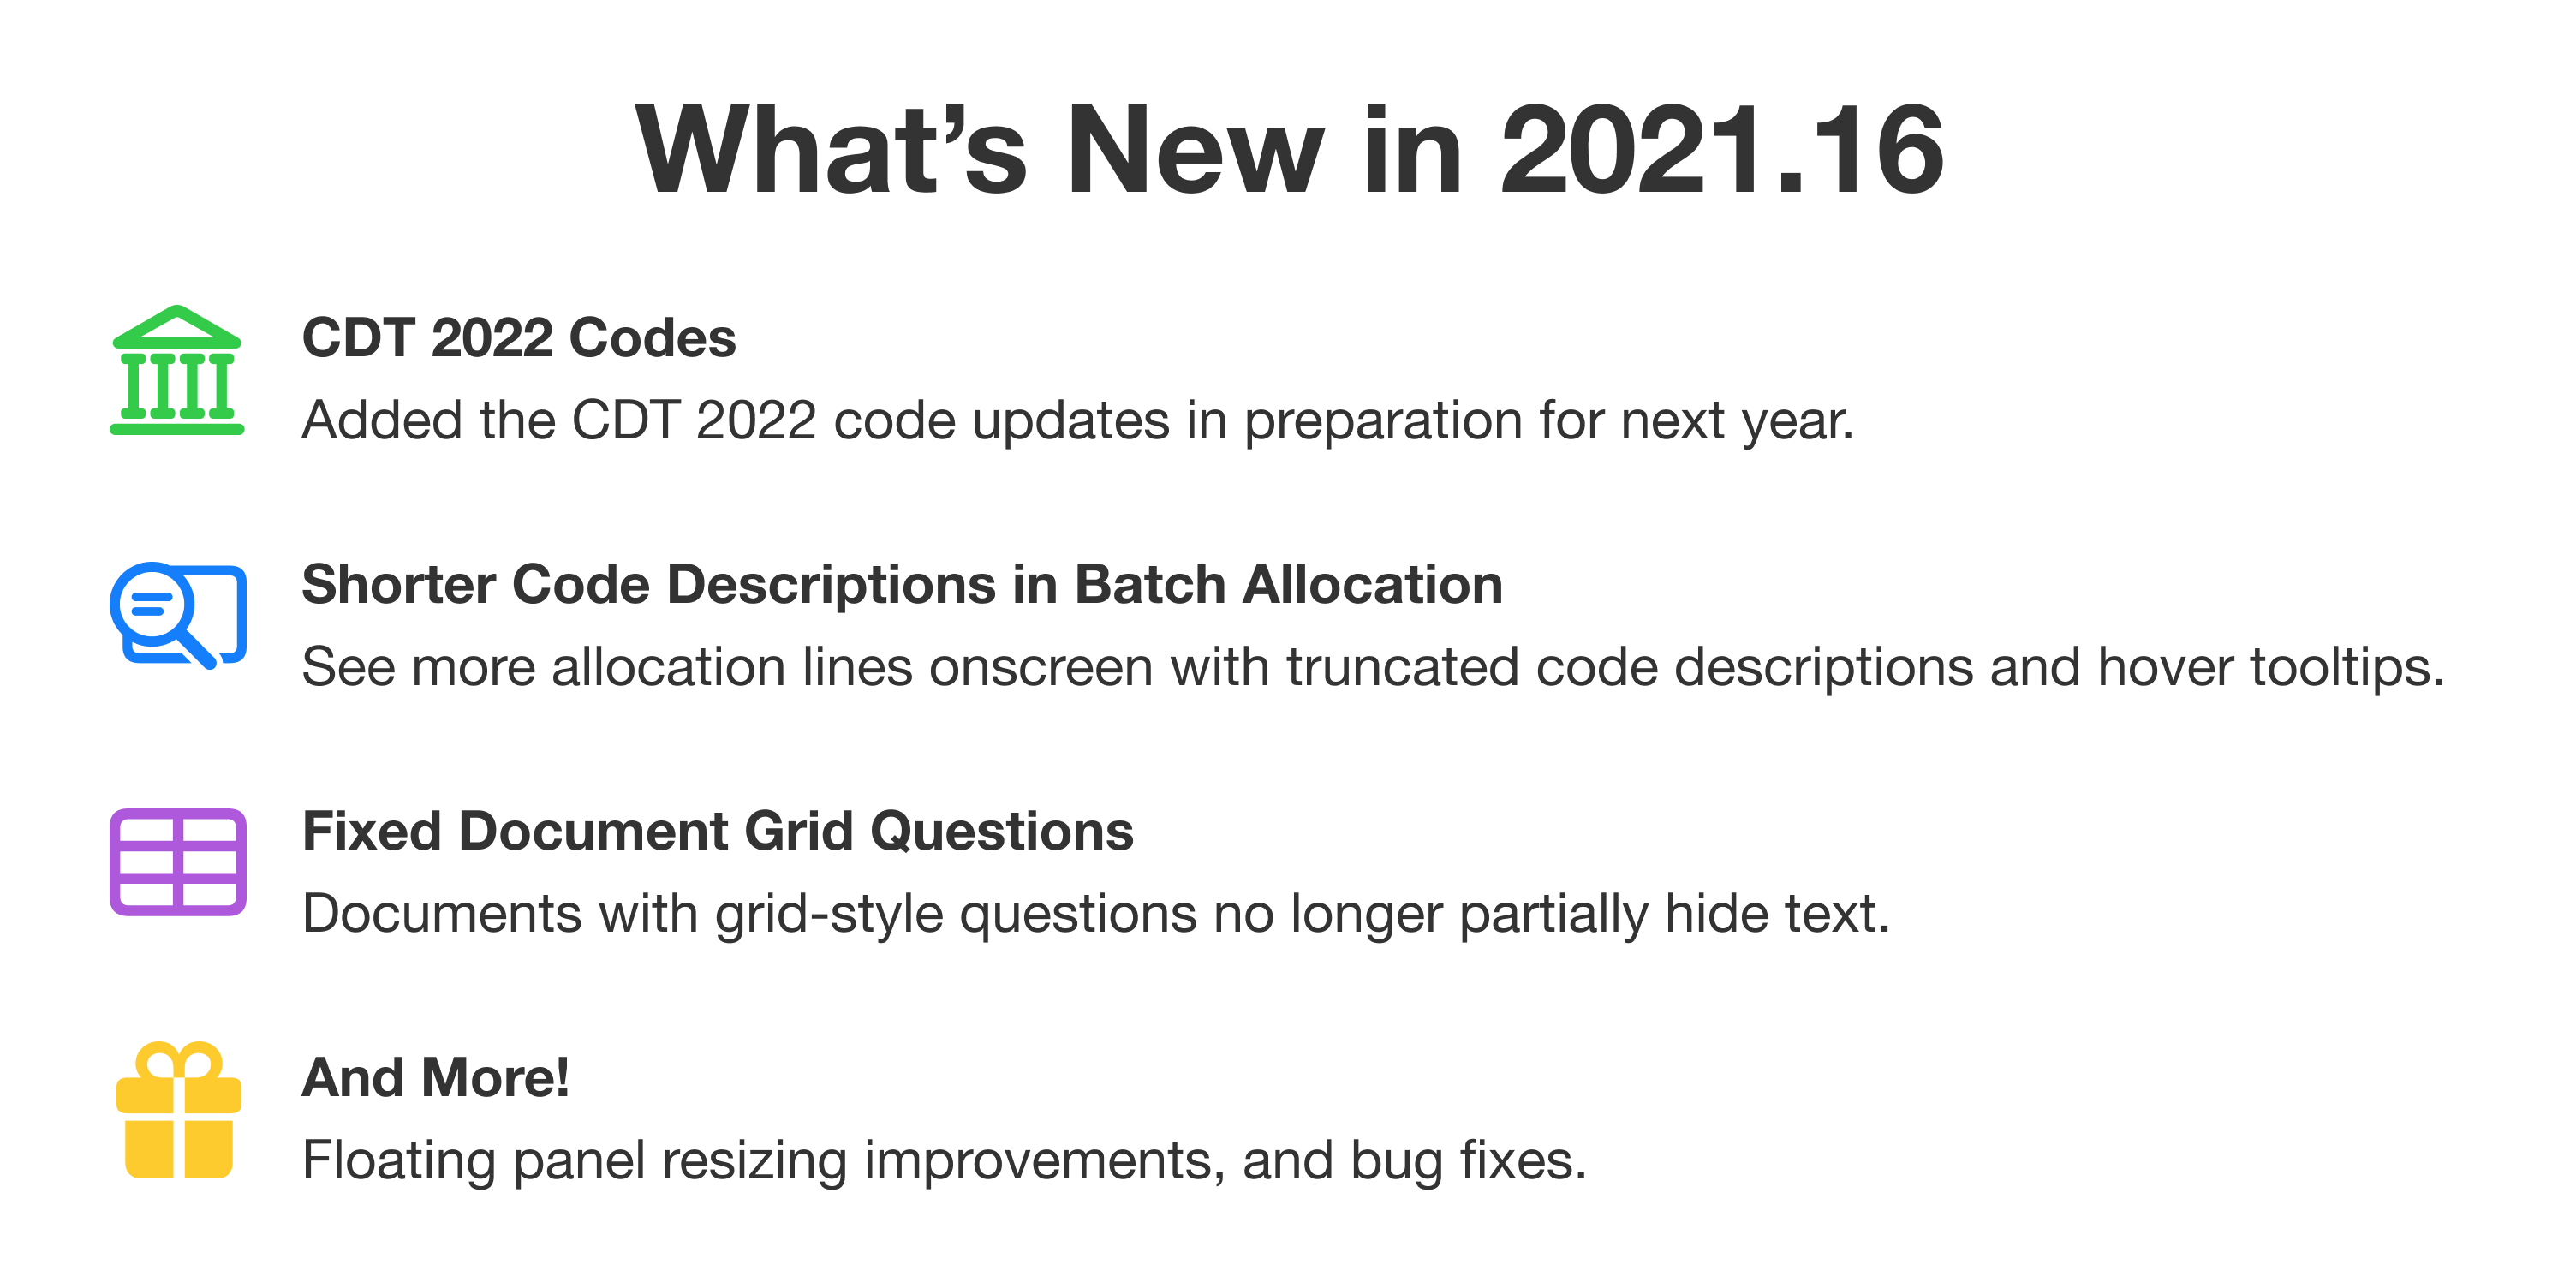 What's new in 2021.16. First: CDT 2022 codes. Added the CDT 2022 code updates in preparation for next year. Second: Shorter code descriptions in batch allocation. See more allocation lines onscreen with truncated code descriptions and hover tooltips. Third: Fixed document grid questions. Documents with grid-style questions no longer partially hide text. And more! Floating panel resizing improvements, and bug fixes.